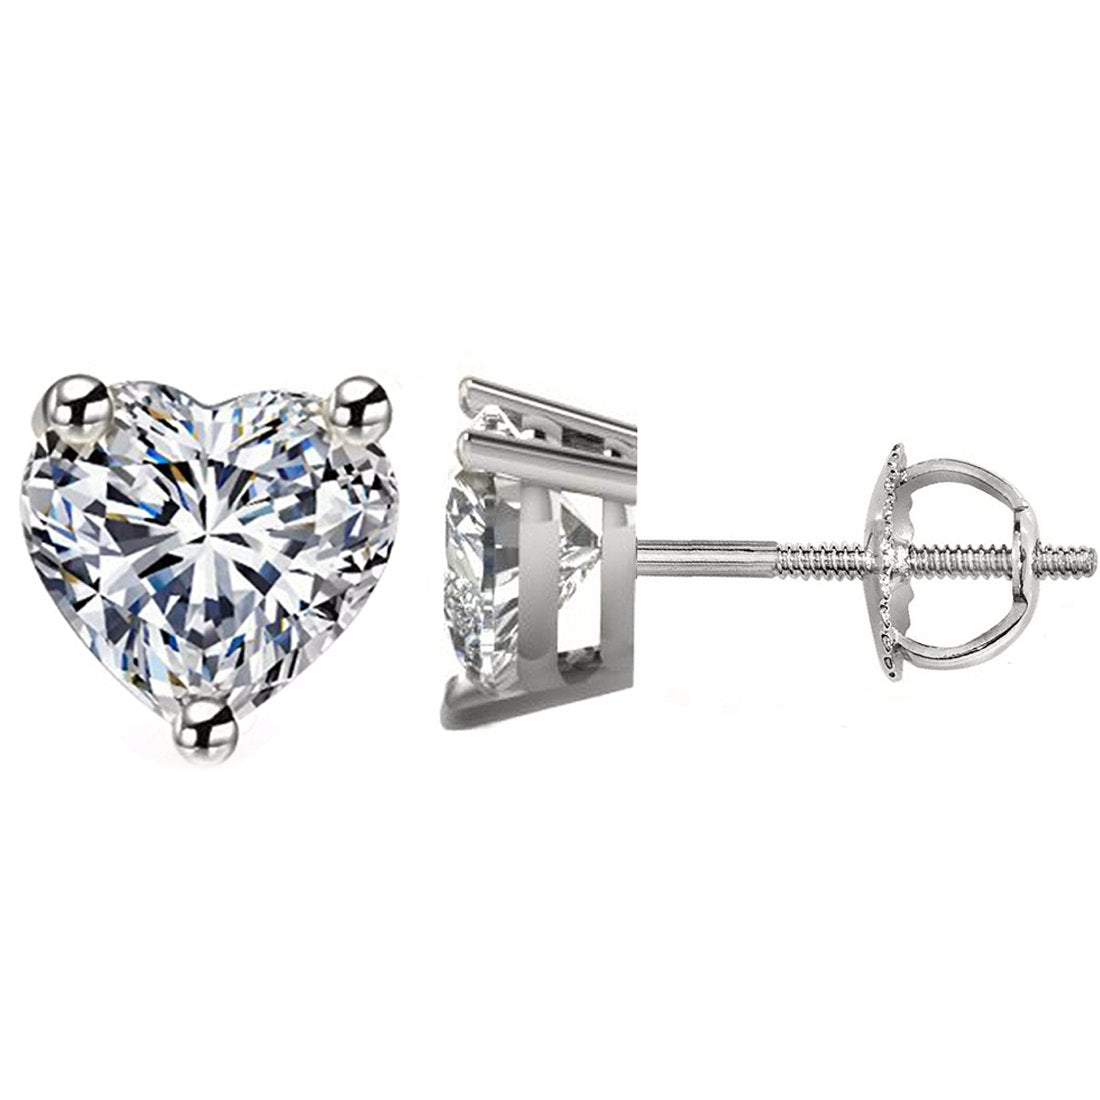 PLATINUM 950 HEART. Choose From 0.25 CTW To 10.00 CTW